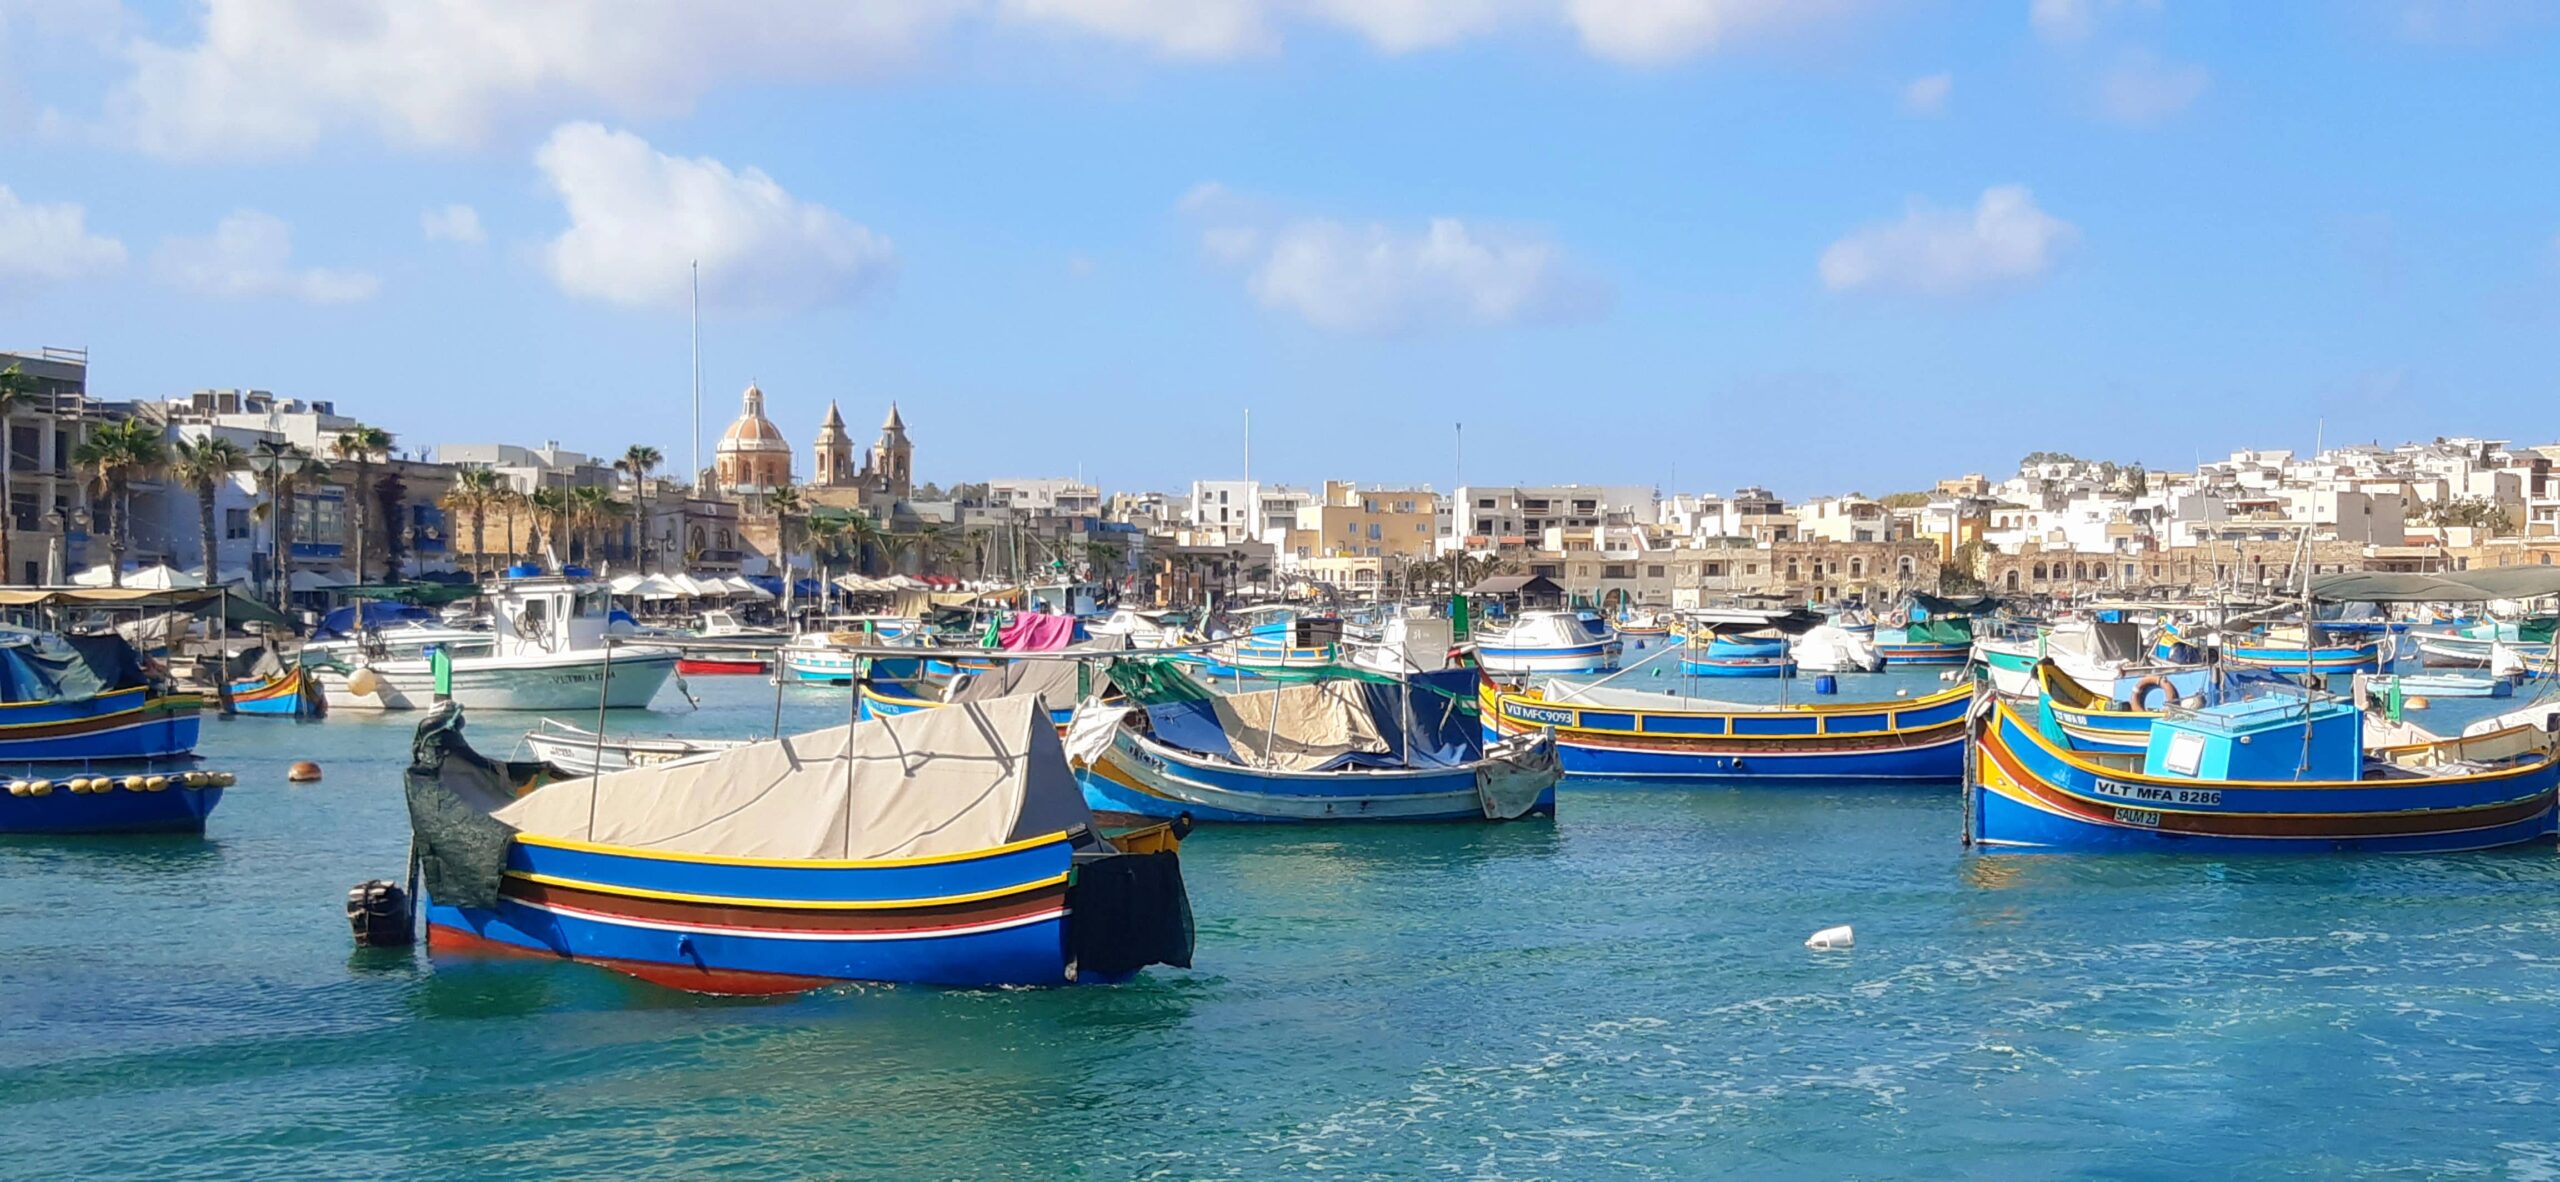 10 Things I Wished I Knew Before Moving to Malta